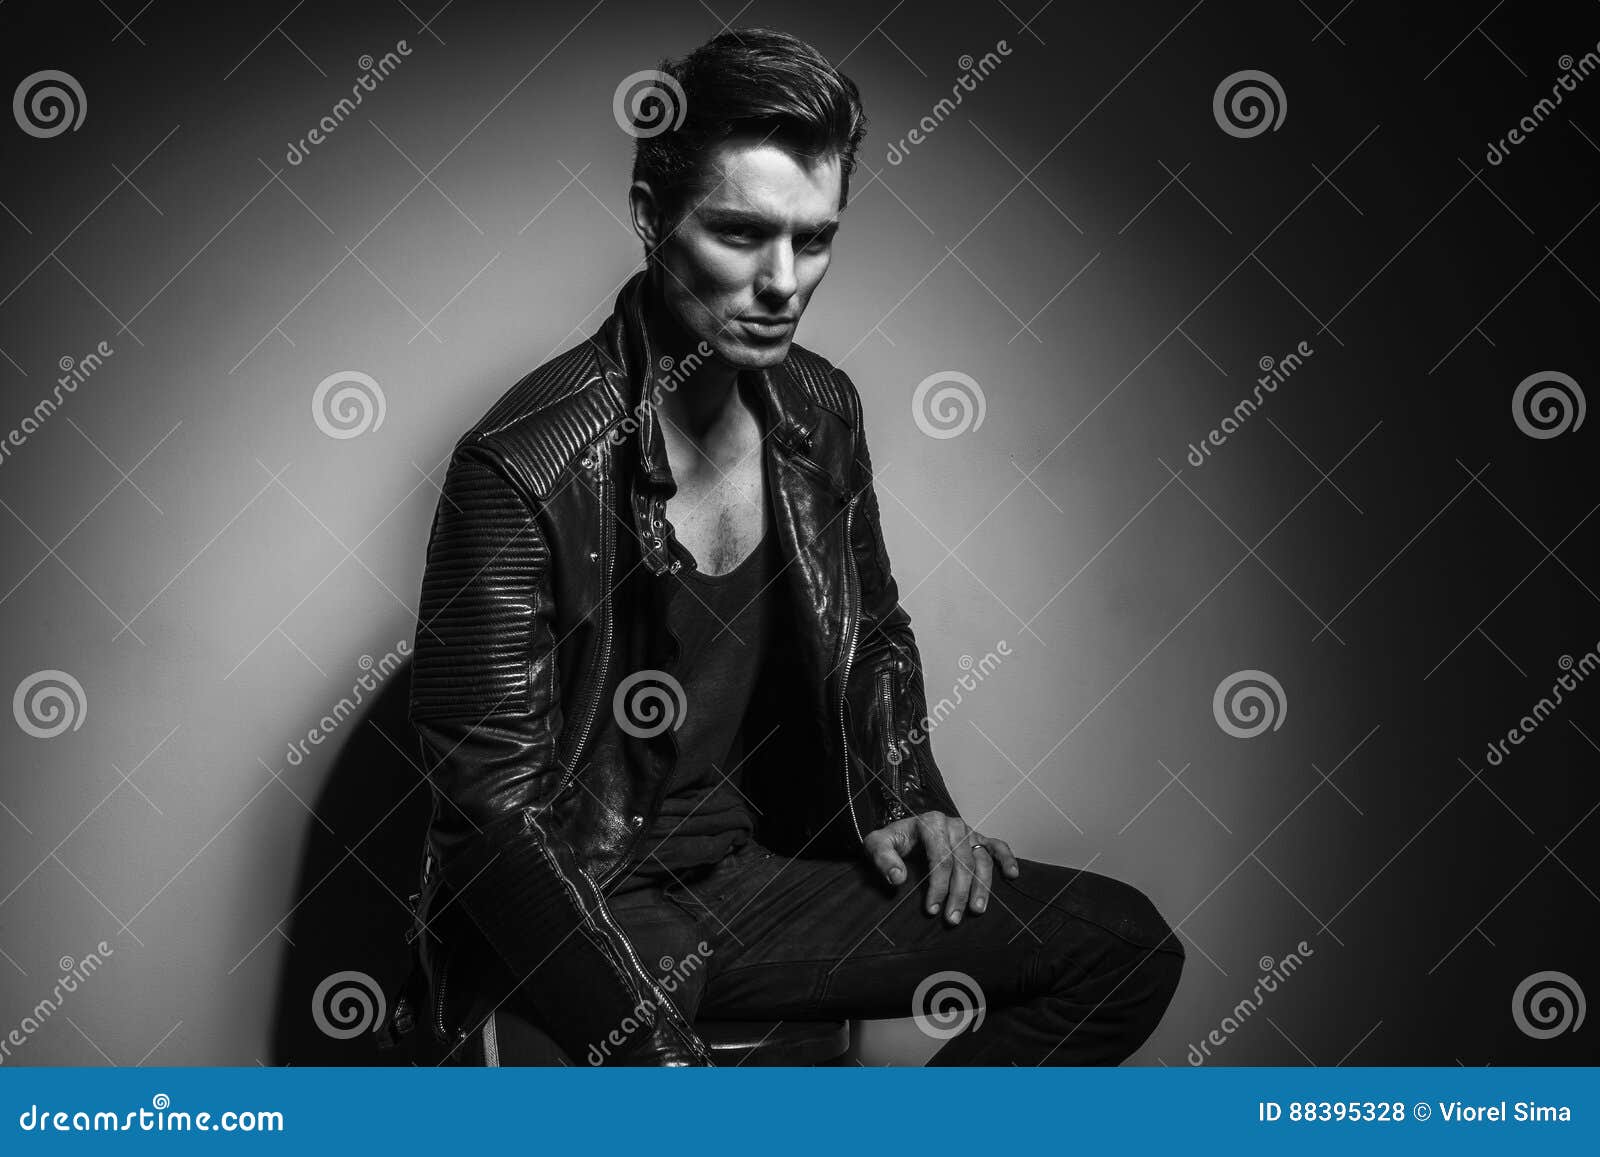 Black and White Picture of Seated Rock and Roll Man Stock Photo - Image ...